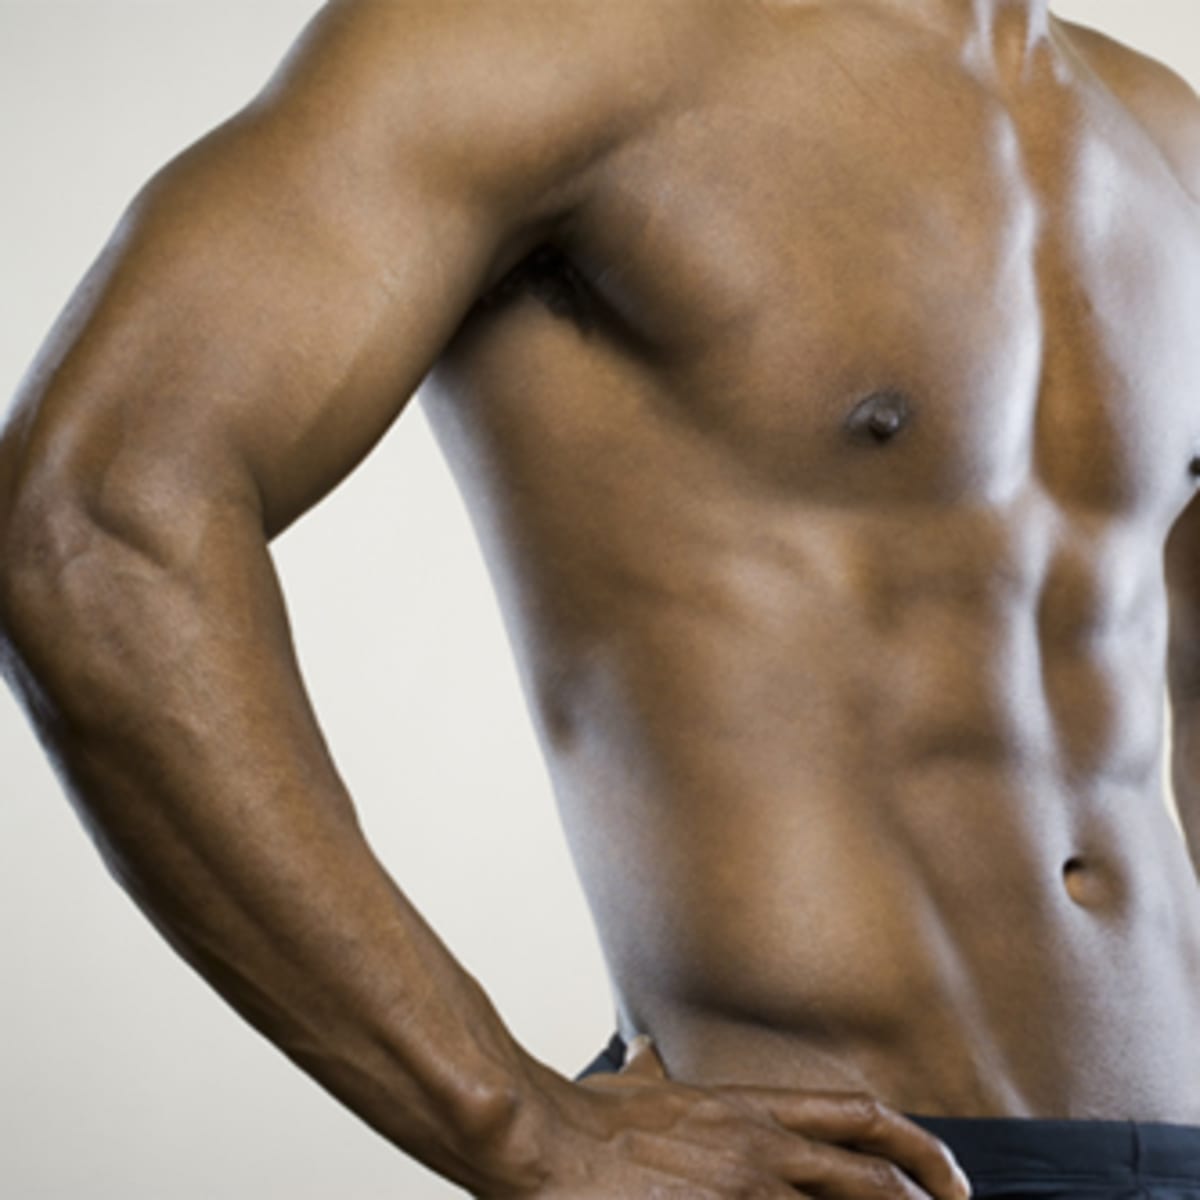 How To Get A Smaller Waist For Men (5 TIPS!) 